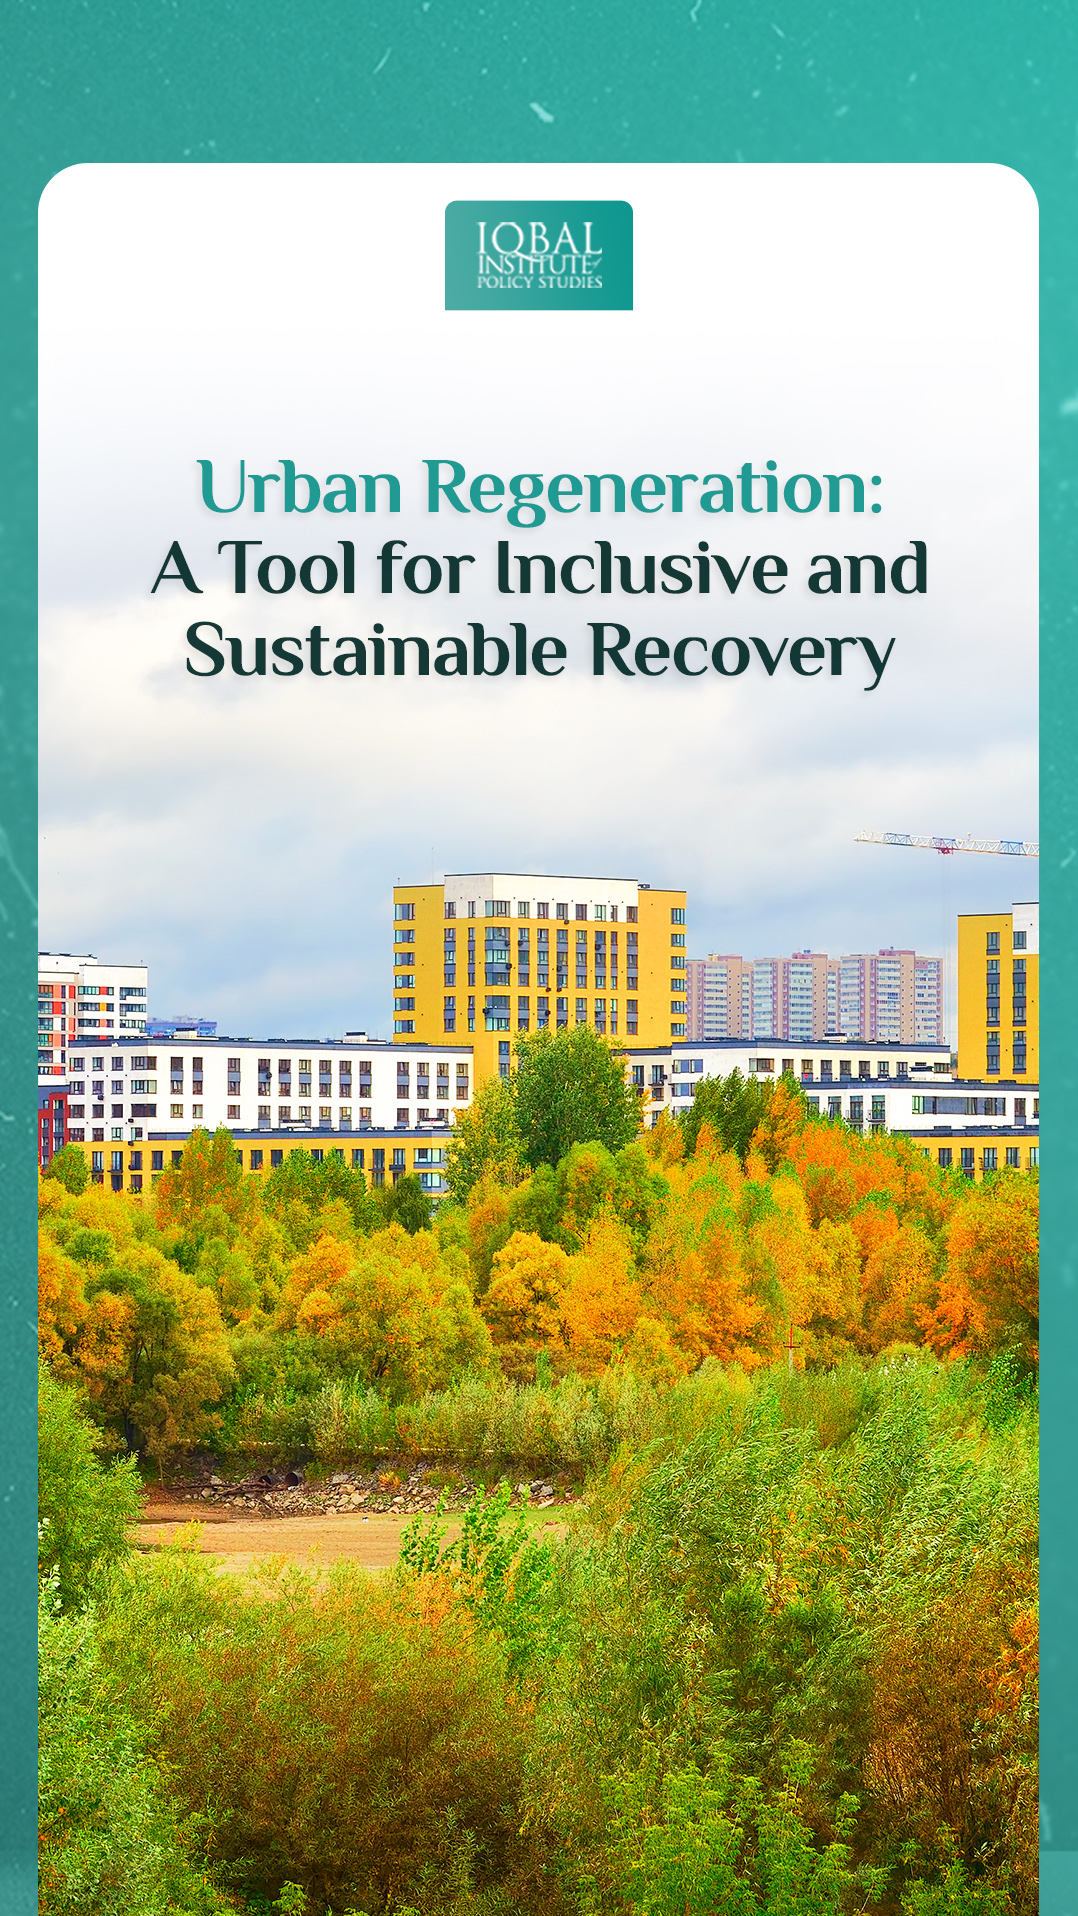 Urban Regeneration: A Tool for Inclusive and Sustainable Recovery